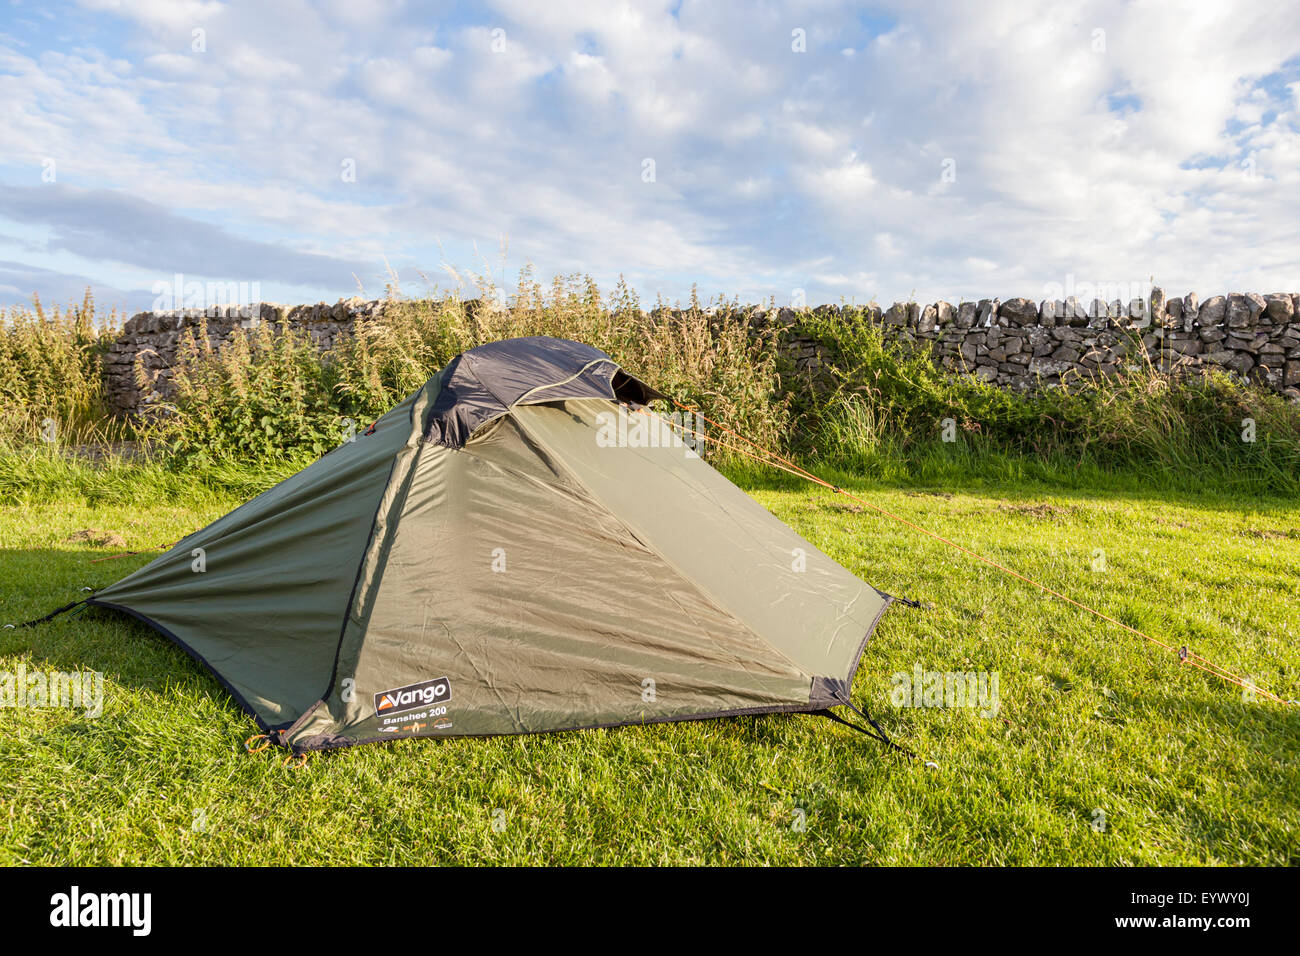 Small tent. The Vango Banshee 200 two person tent on a campsite, Derbyshire, England, UK Stock Photo